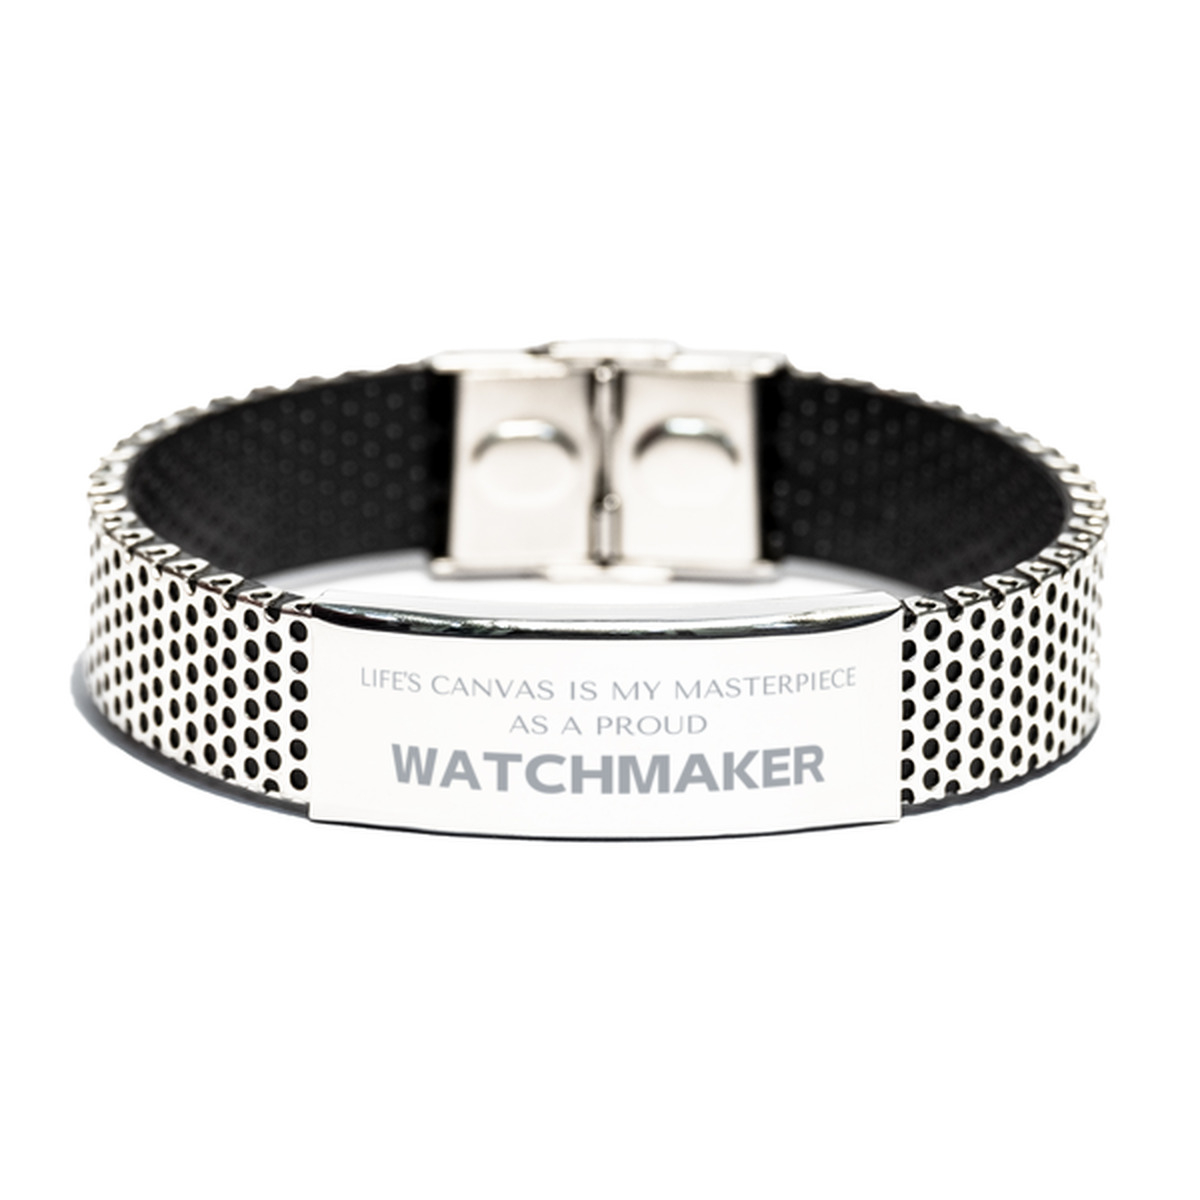 Proud Watchmaker Gifts, Life's canvas is my masterpiece, Epic Birthday Christmas Unique Stainless Steel Bracelet For Watchmaker, Coworkers, Men, Women, Friends